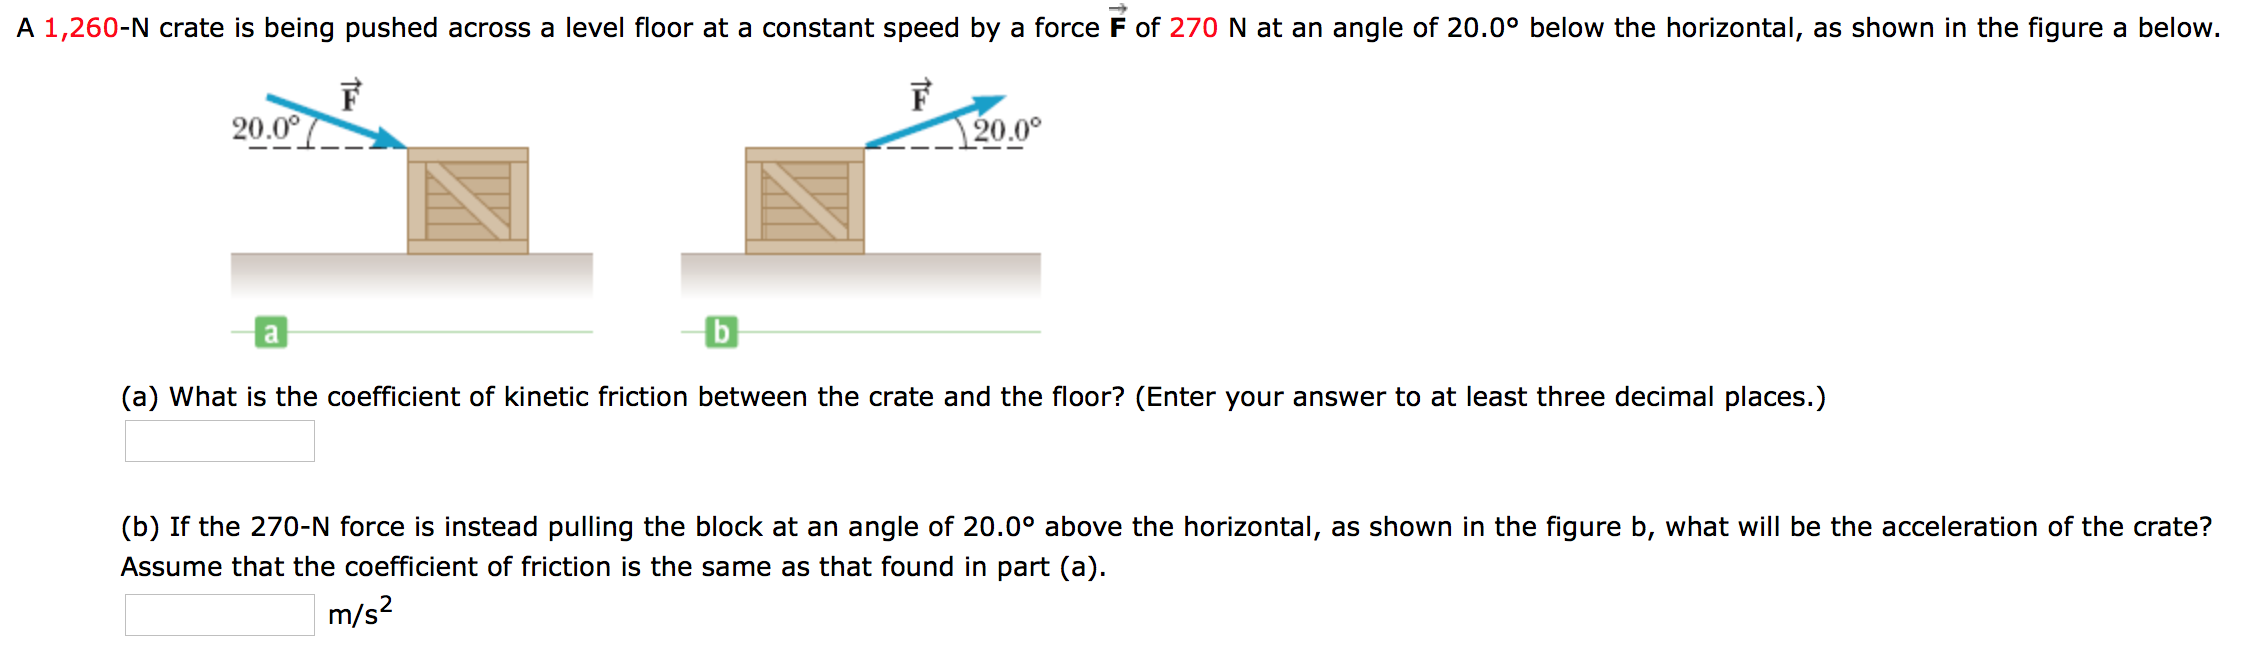 A 1,260-N crate is being pushed across a level floor at a constant speed by a force F of 270 N at an angle of 20.0° below the horizontal, as shown in the figure a below.
20.00
20.0°
b
a
(a) What is the coefficient of kinetic friction between the crate and the floor? (Enter your answer to at least three decimal places.)
(b) If the 270-N force is instead pulling the block at an angle of 20.0° above the horizontal, as shown in the figure b, what will be the acceleration of the crate?
Assume that the coefficient of friction is the same as that found in part (a)
m/s2
